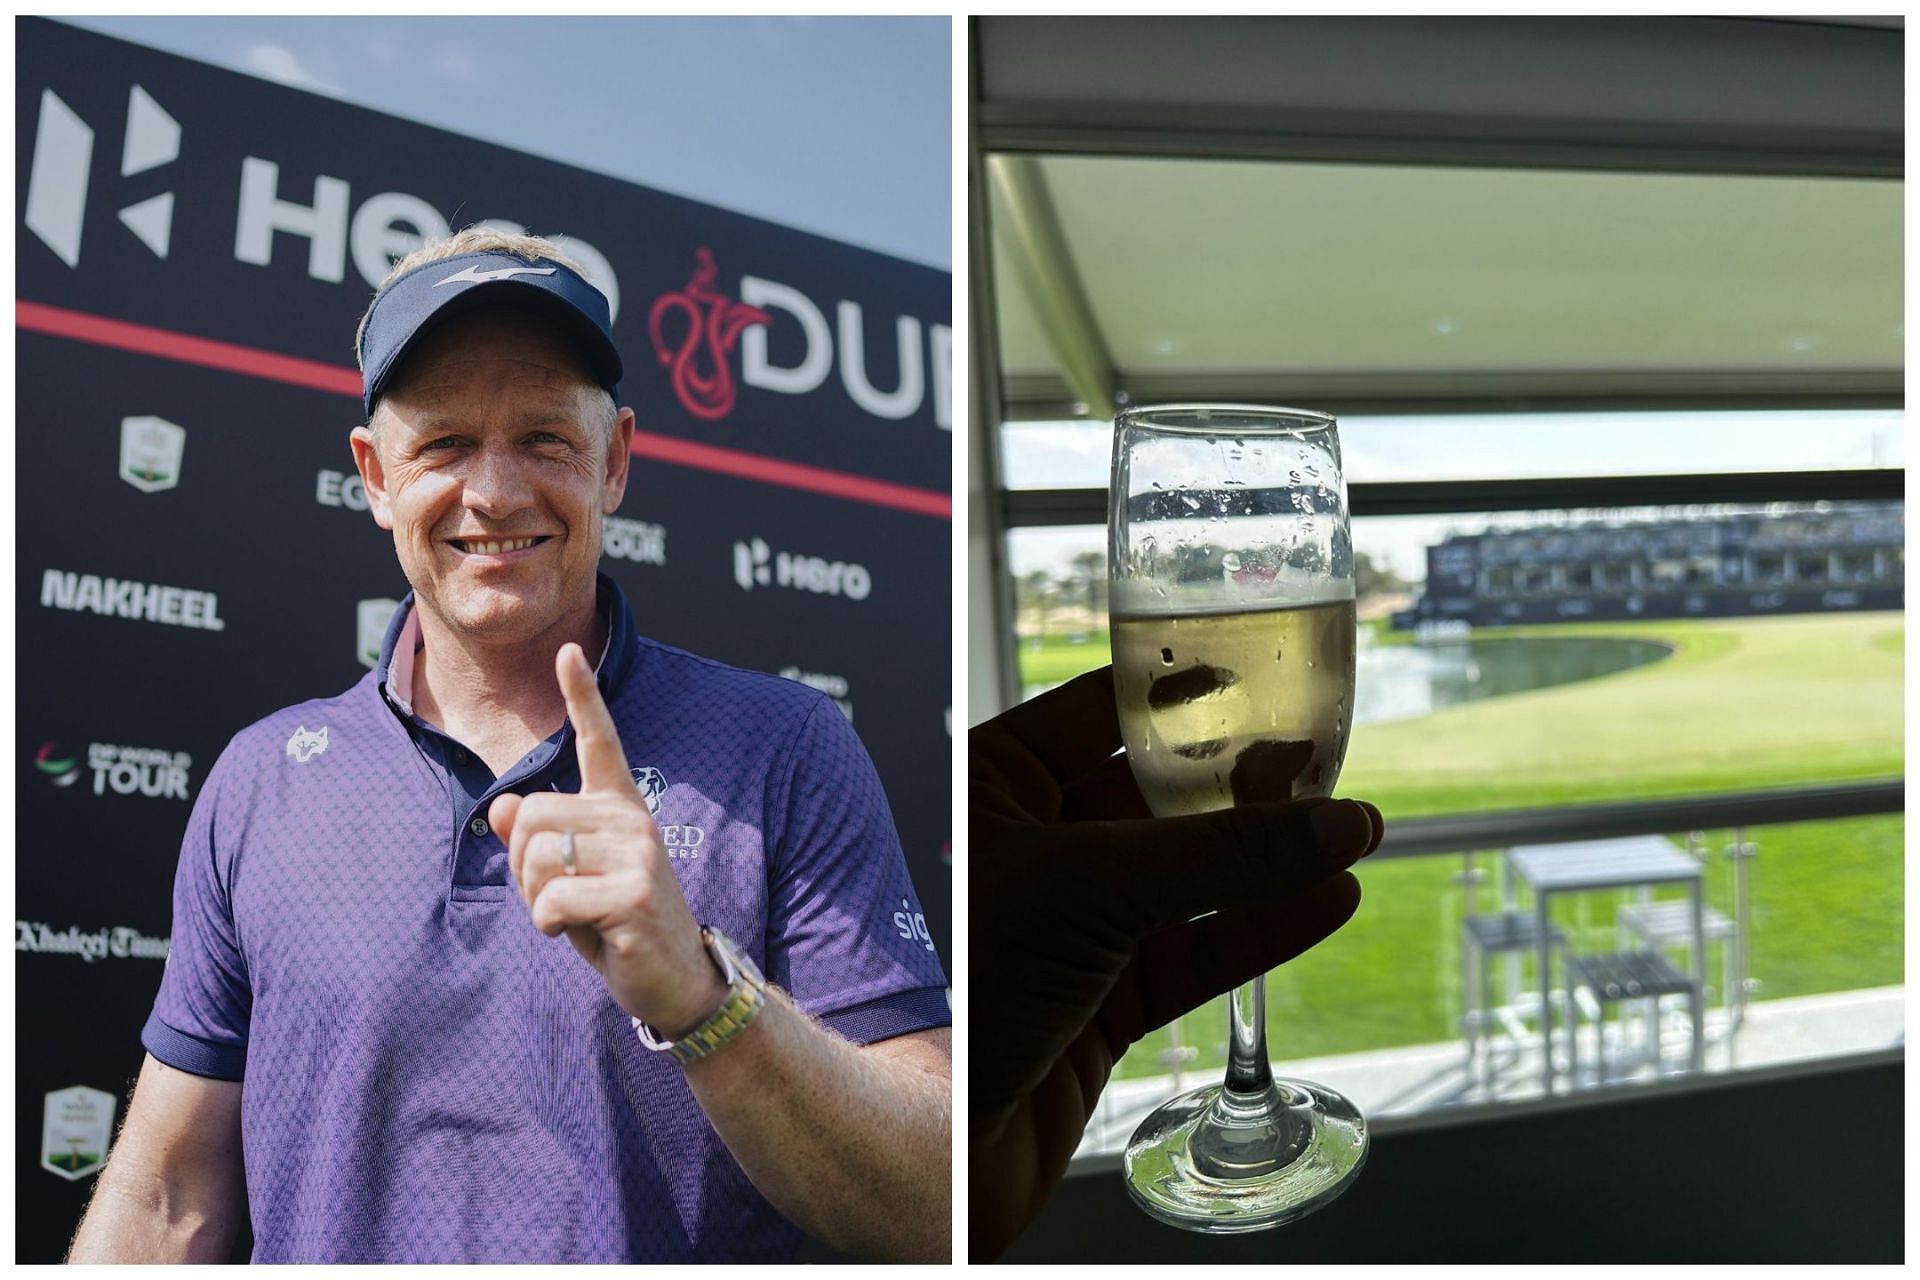 Luke Donald treated the media centre with champagne after acing a hole at the Hero Dubai Desert Classic